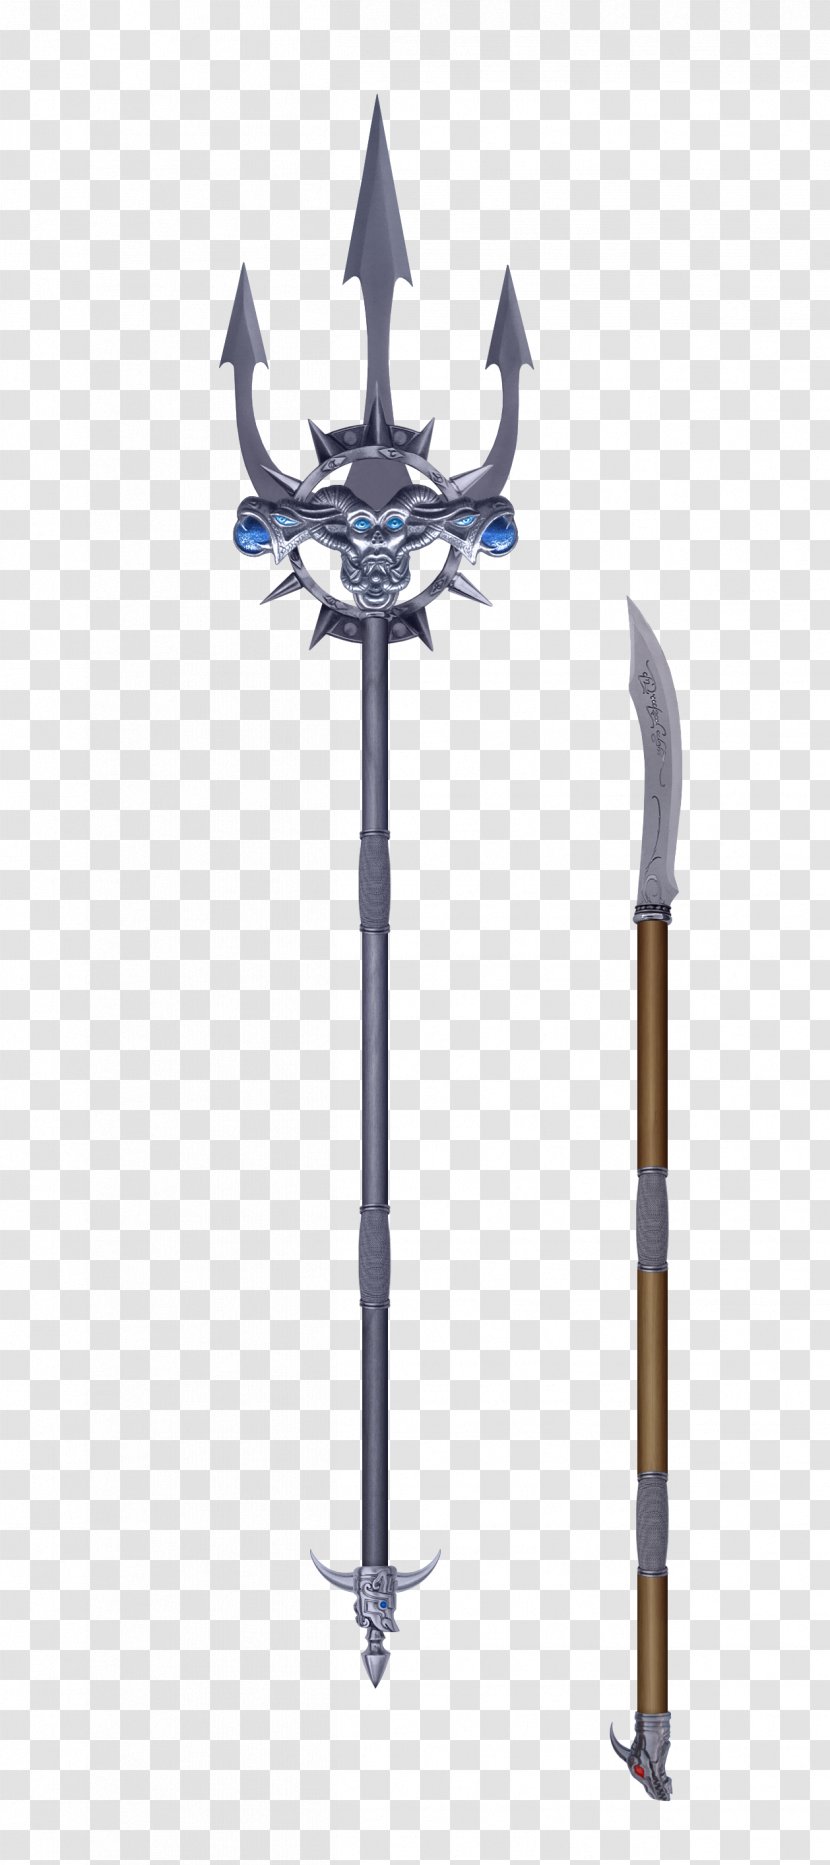 Sword Knife Weapon Trident - Cold - Silver Weapons Transparent PNG